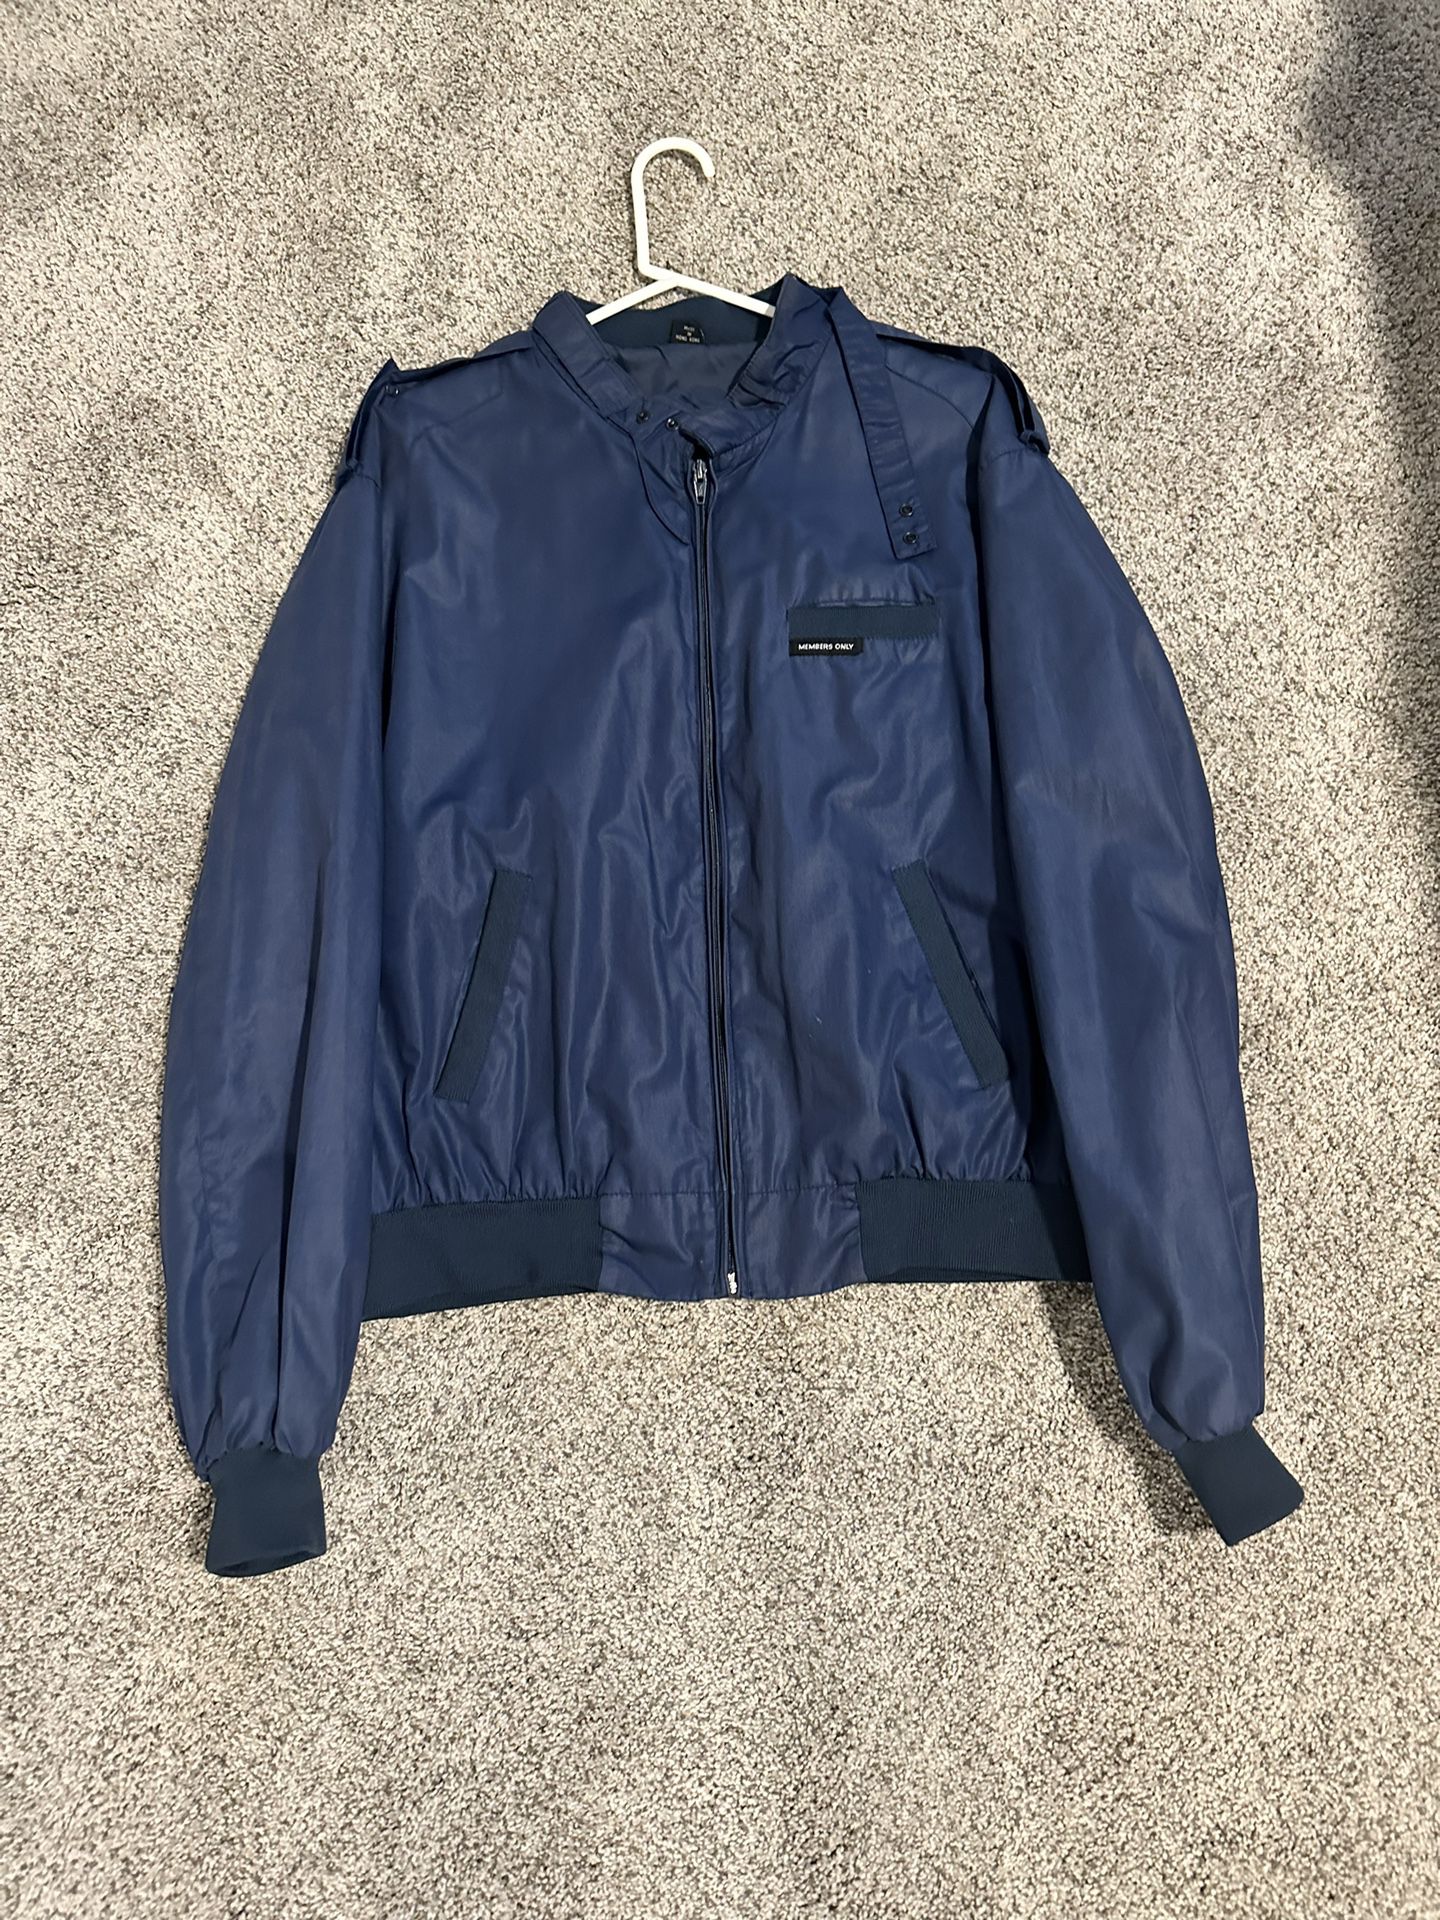 Members Only Bomber Jacket 